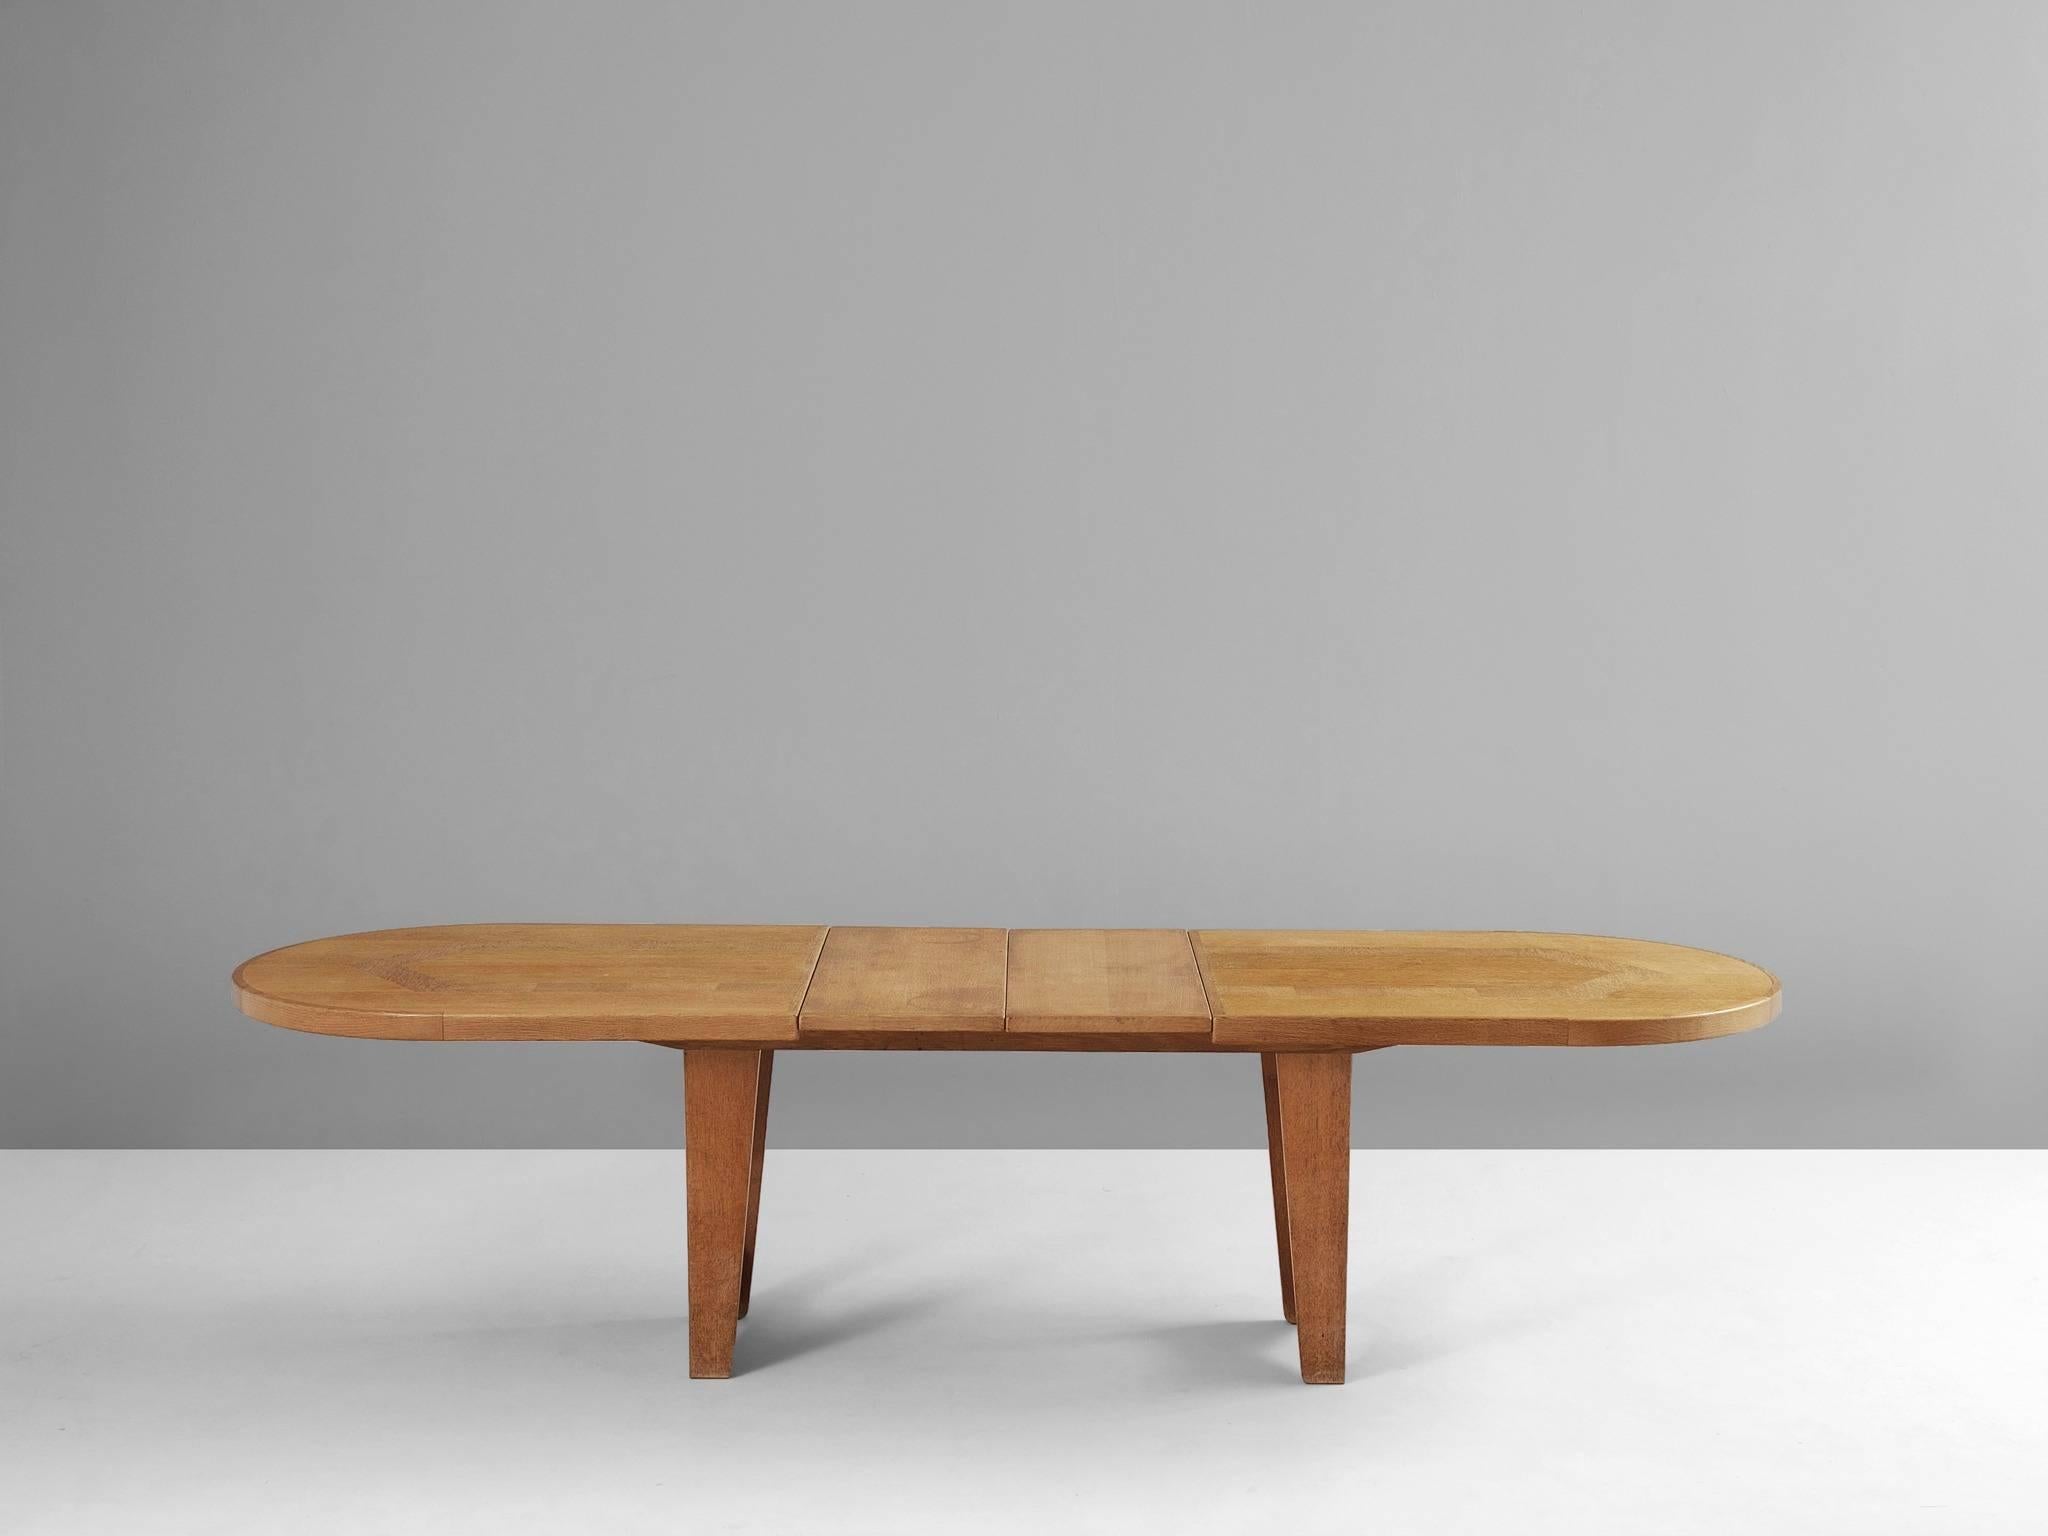 Extendable dining table, in solid oak, by Guillerme & Chambron, France, 1960s. 

Oval shaped dining table with inlaid top. This extendable table in solid oak comes with two optional leaves, which makes it a very versatile item. The two legged base